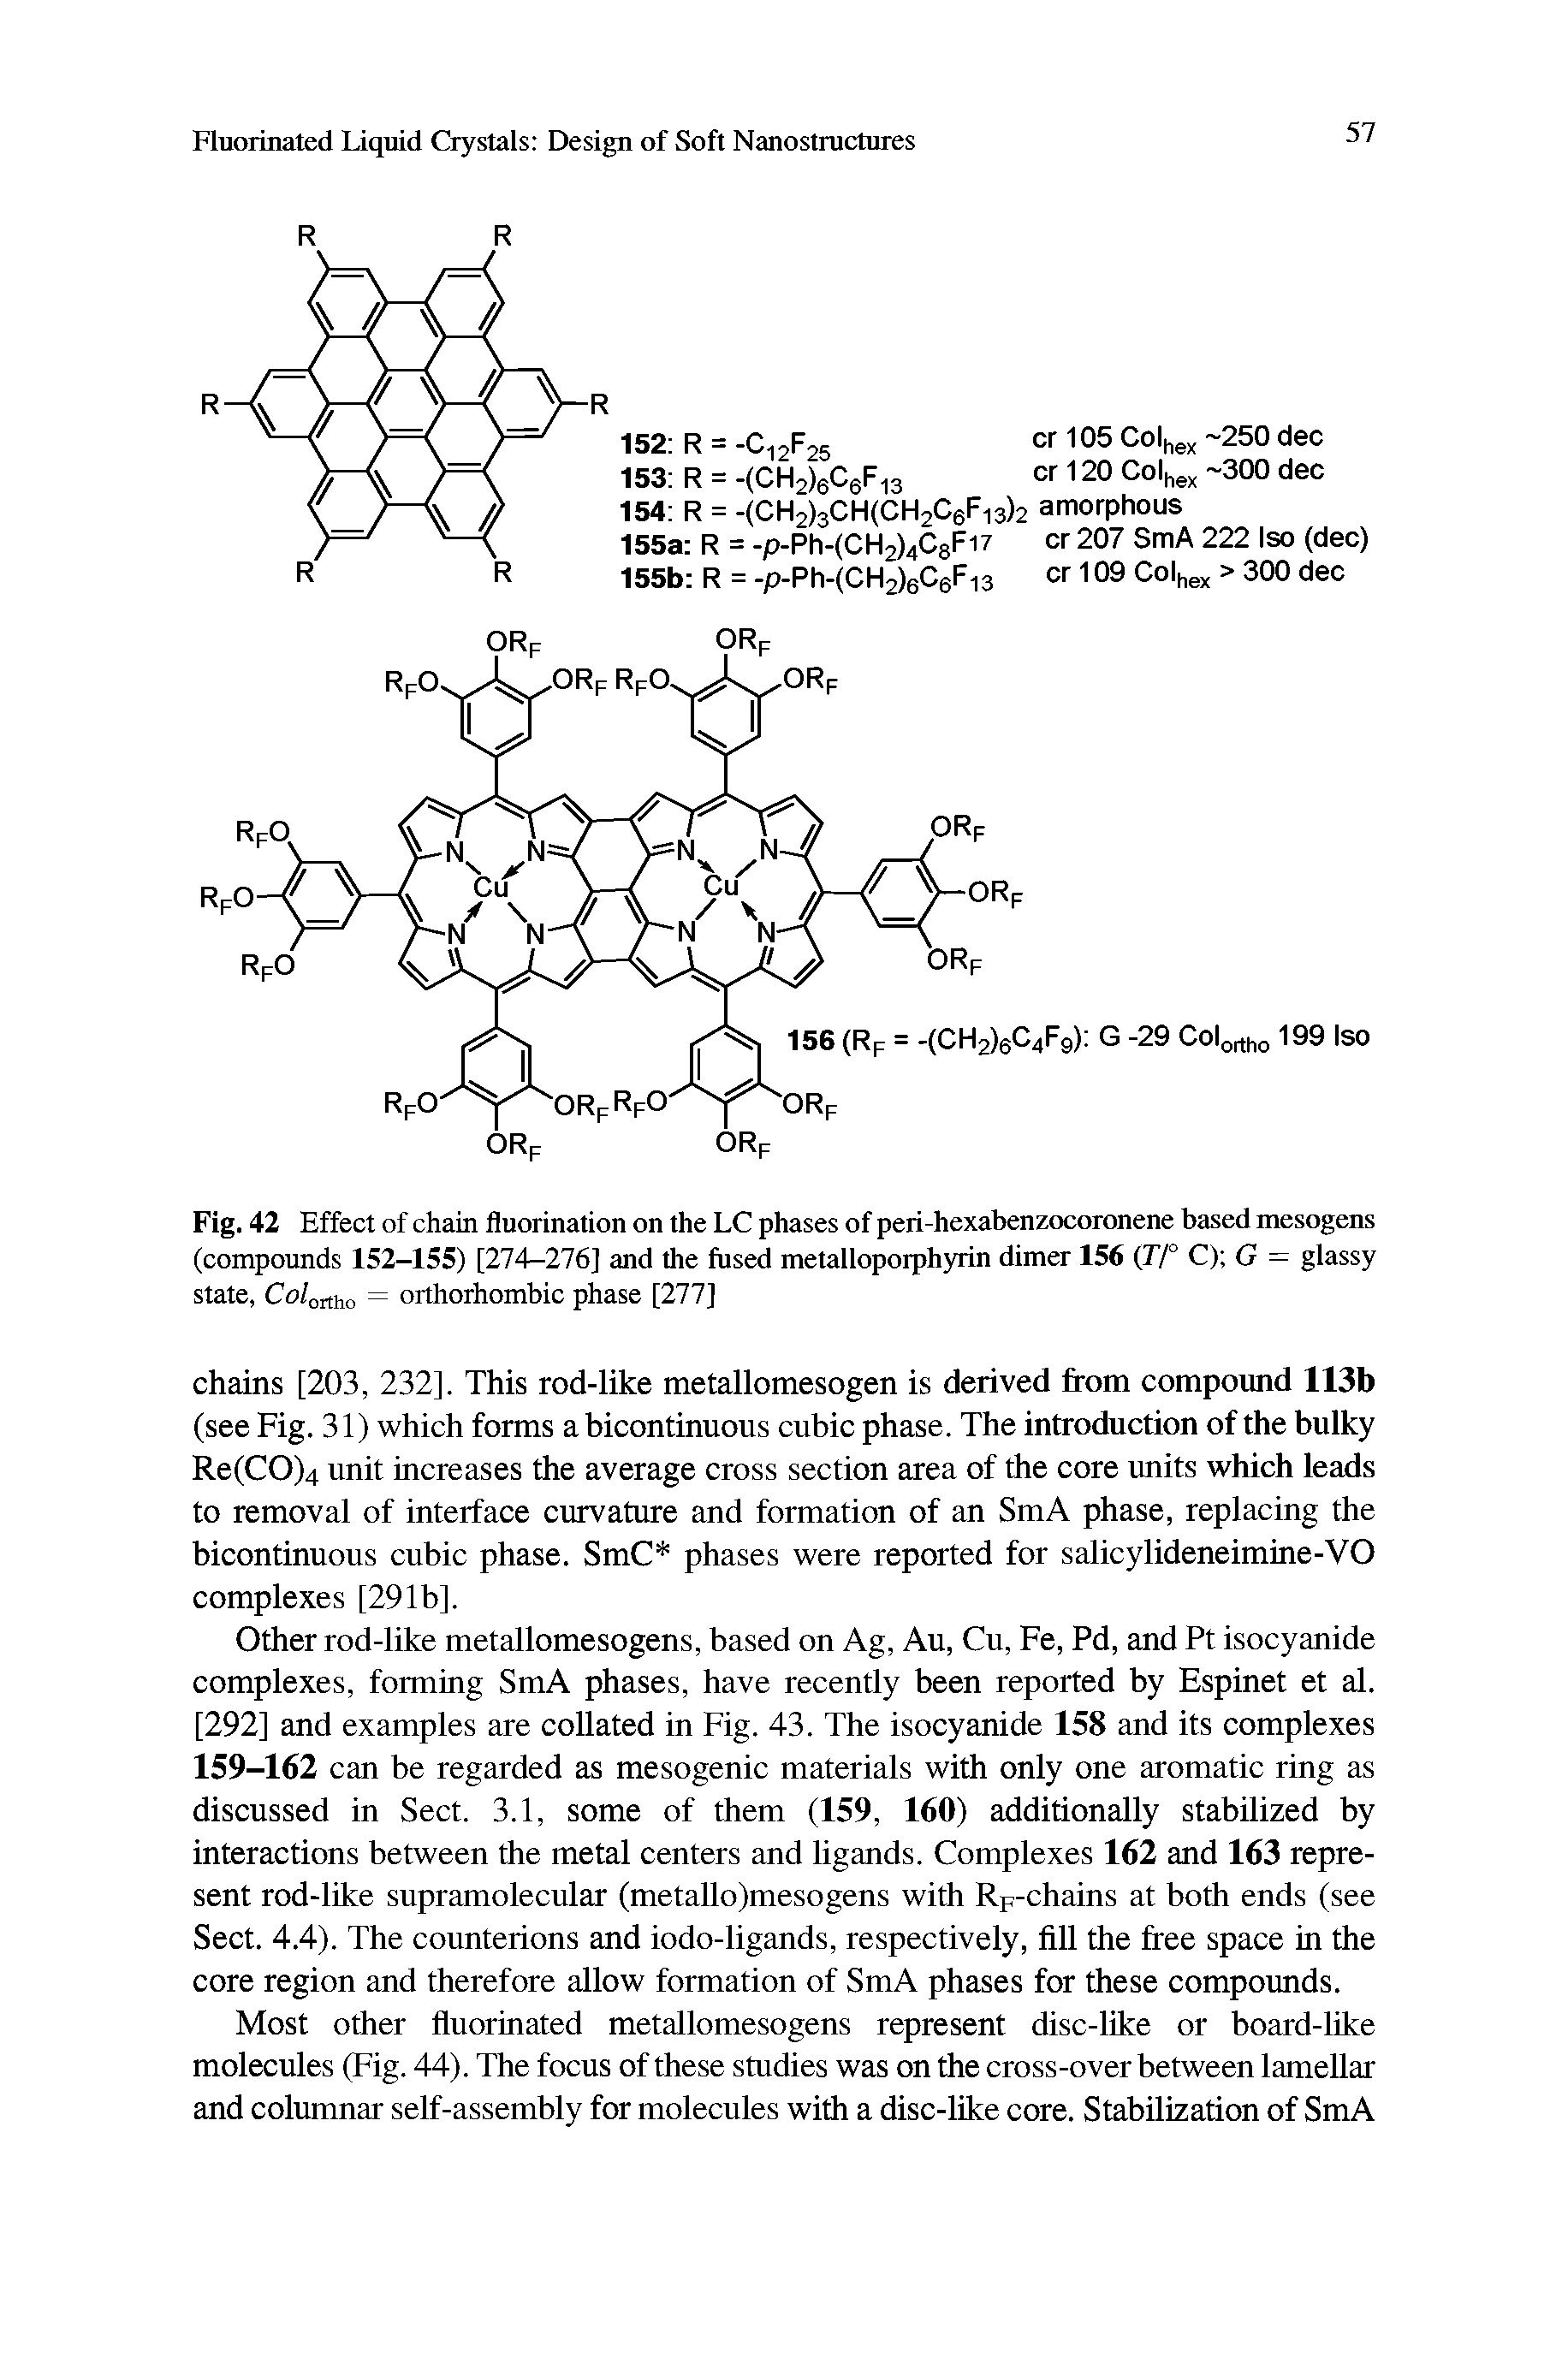 Fig. 42 Effect of chain fluorination on the LC phases of peri-hexabenzocoronene based mesogens (compounds 152-155) [274—276] and the fused metalloporphyrin dimer 156 (7/° C) G = glassy state, Co/ortho = orthorhombic phase [277]...